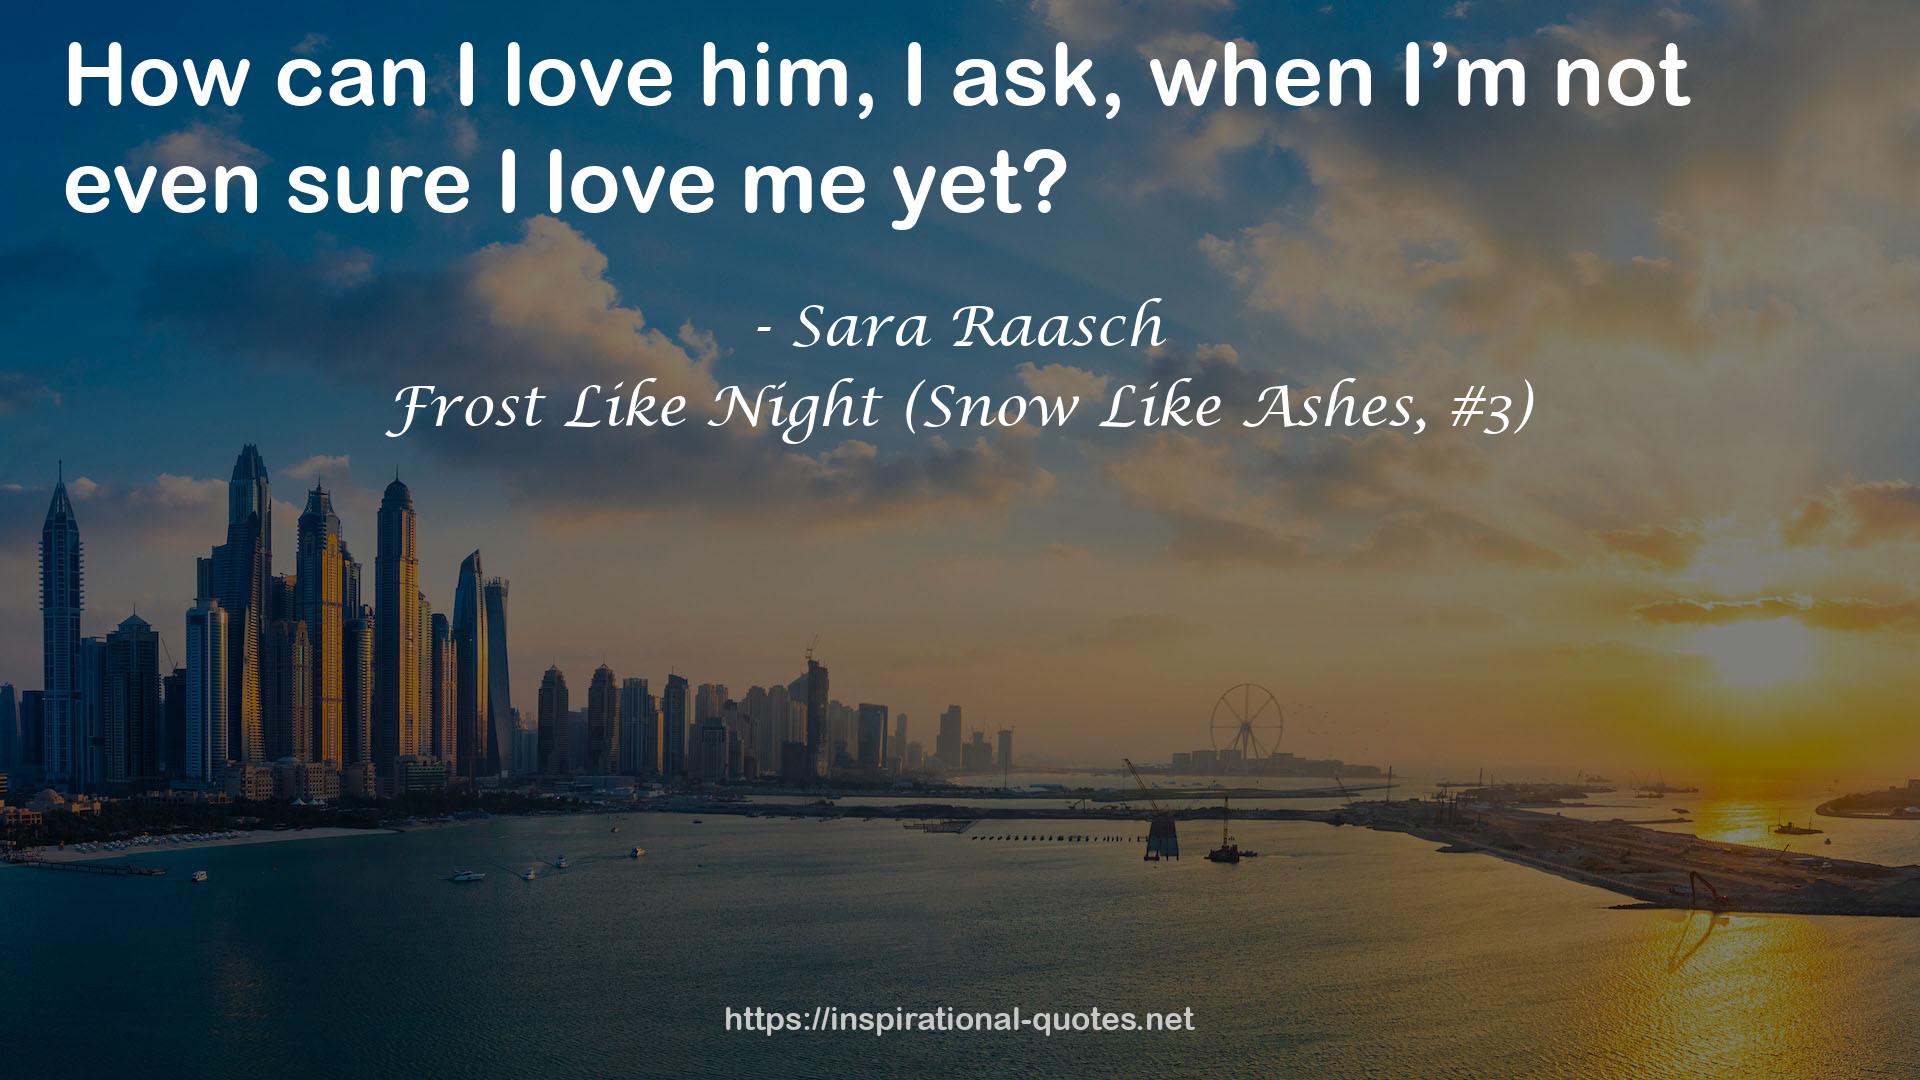 Frost Like Night (Snow Like Ashes, #3) QUOTES